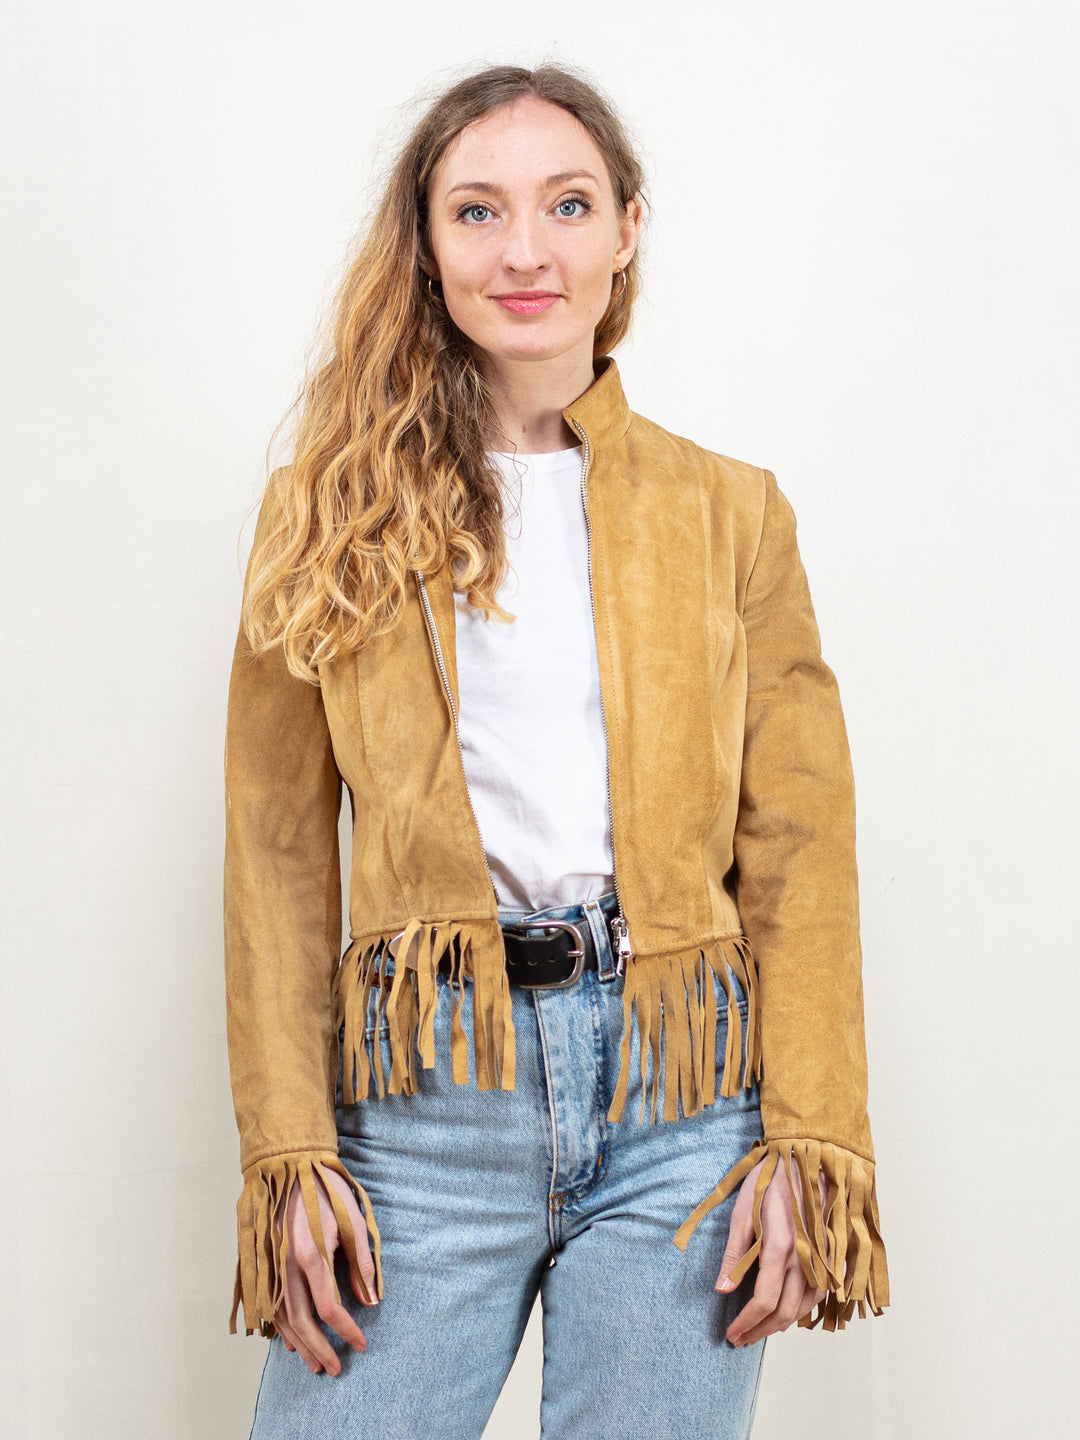 Fringe Suede Jacket vintage 90s cowgirl western jacket fringed jacket cropped leather jacket brown spring outerwear size extra small XS 